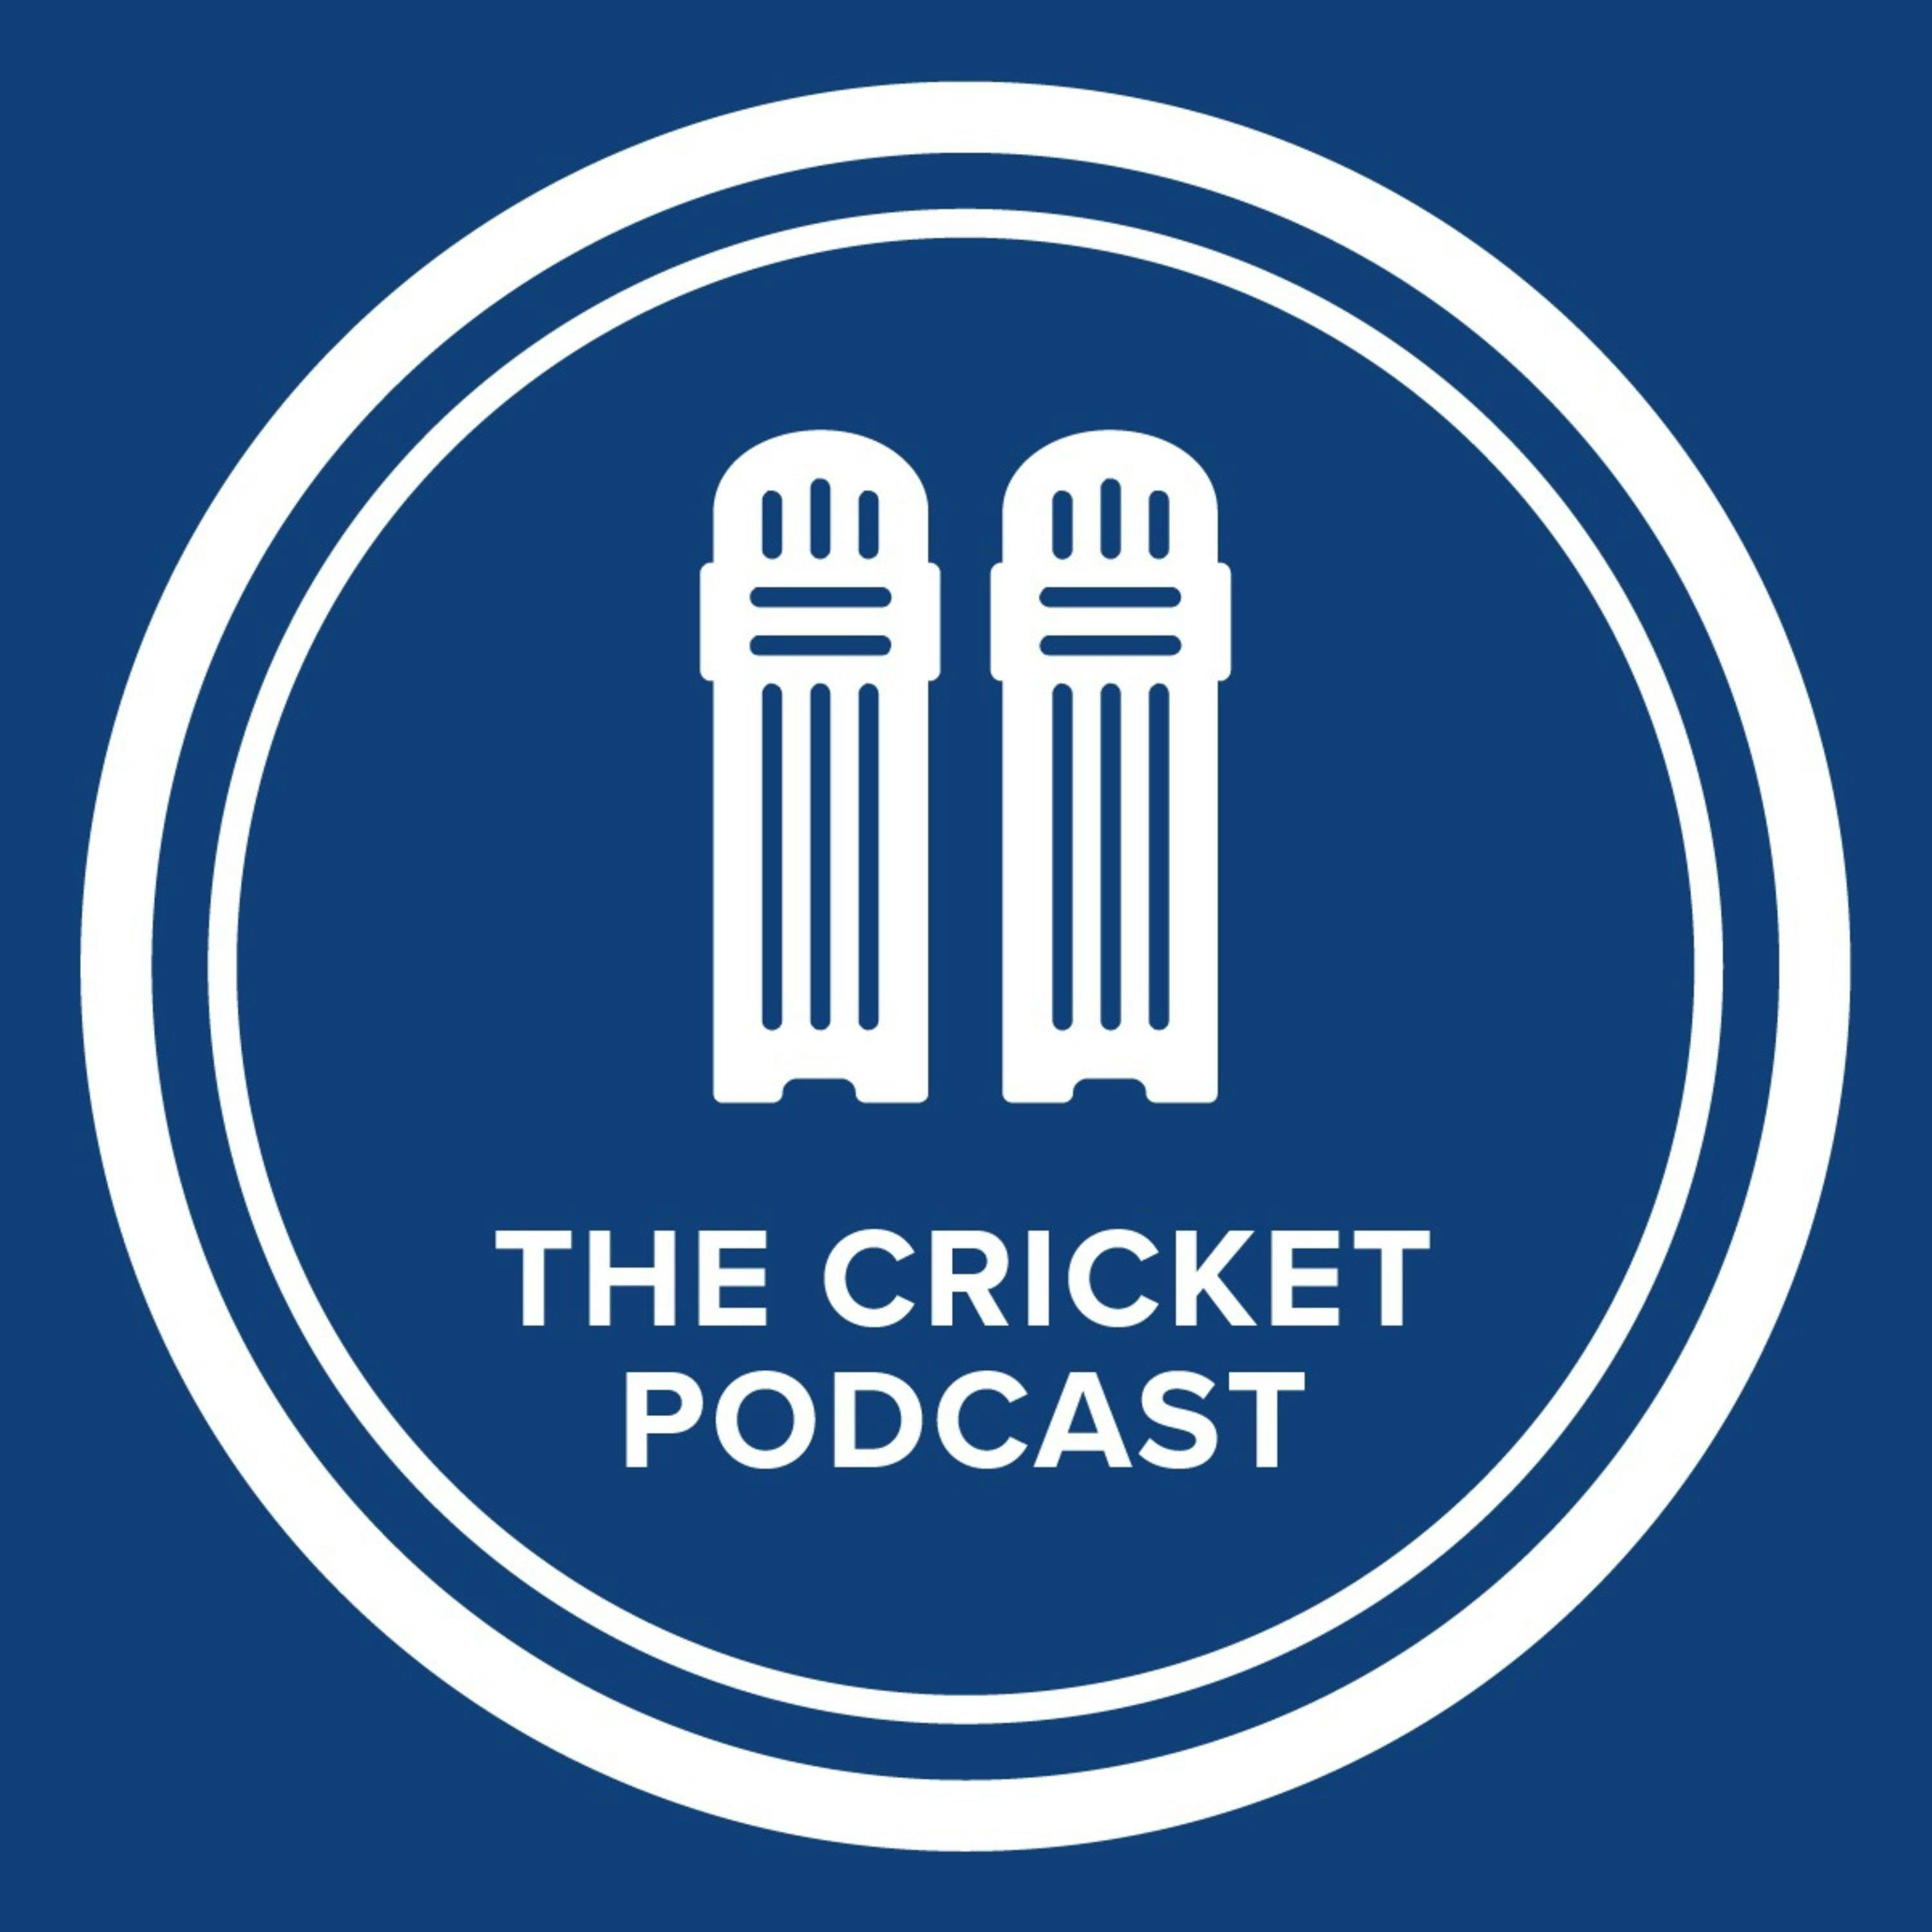 Why Do England Keep Losing? - South Africa Look Good - & Listeners Questions - With Dan Weston